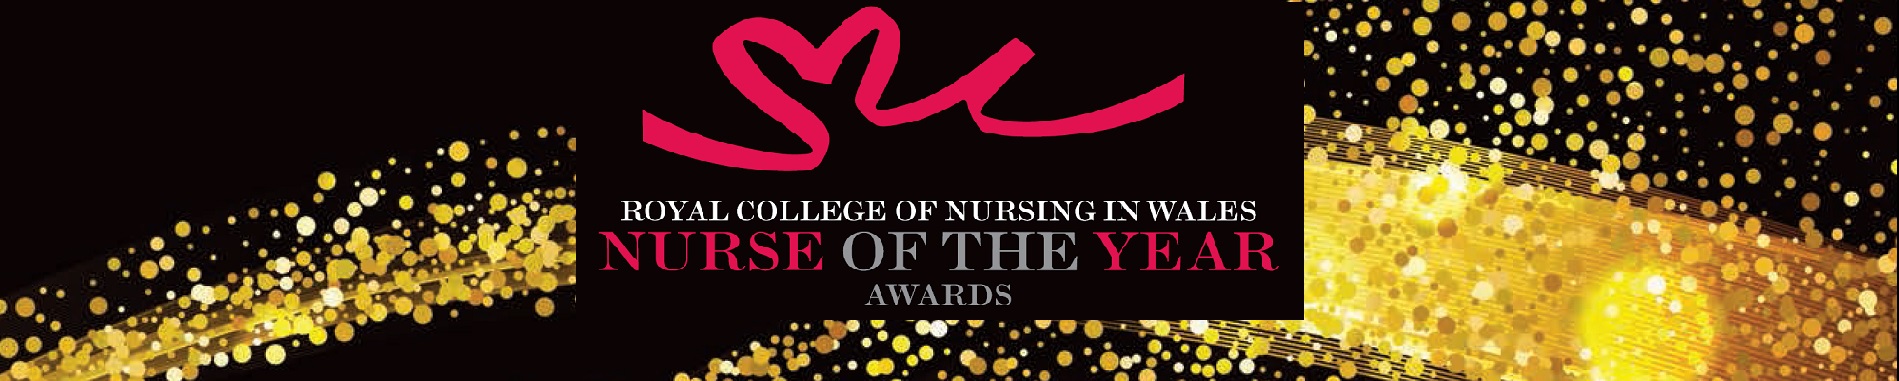 Nurse of the Year awards 2019 banner photo 1